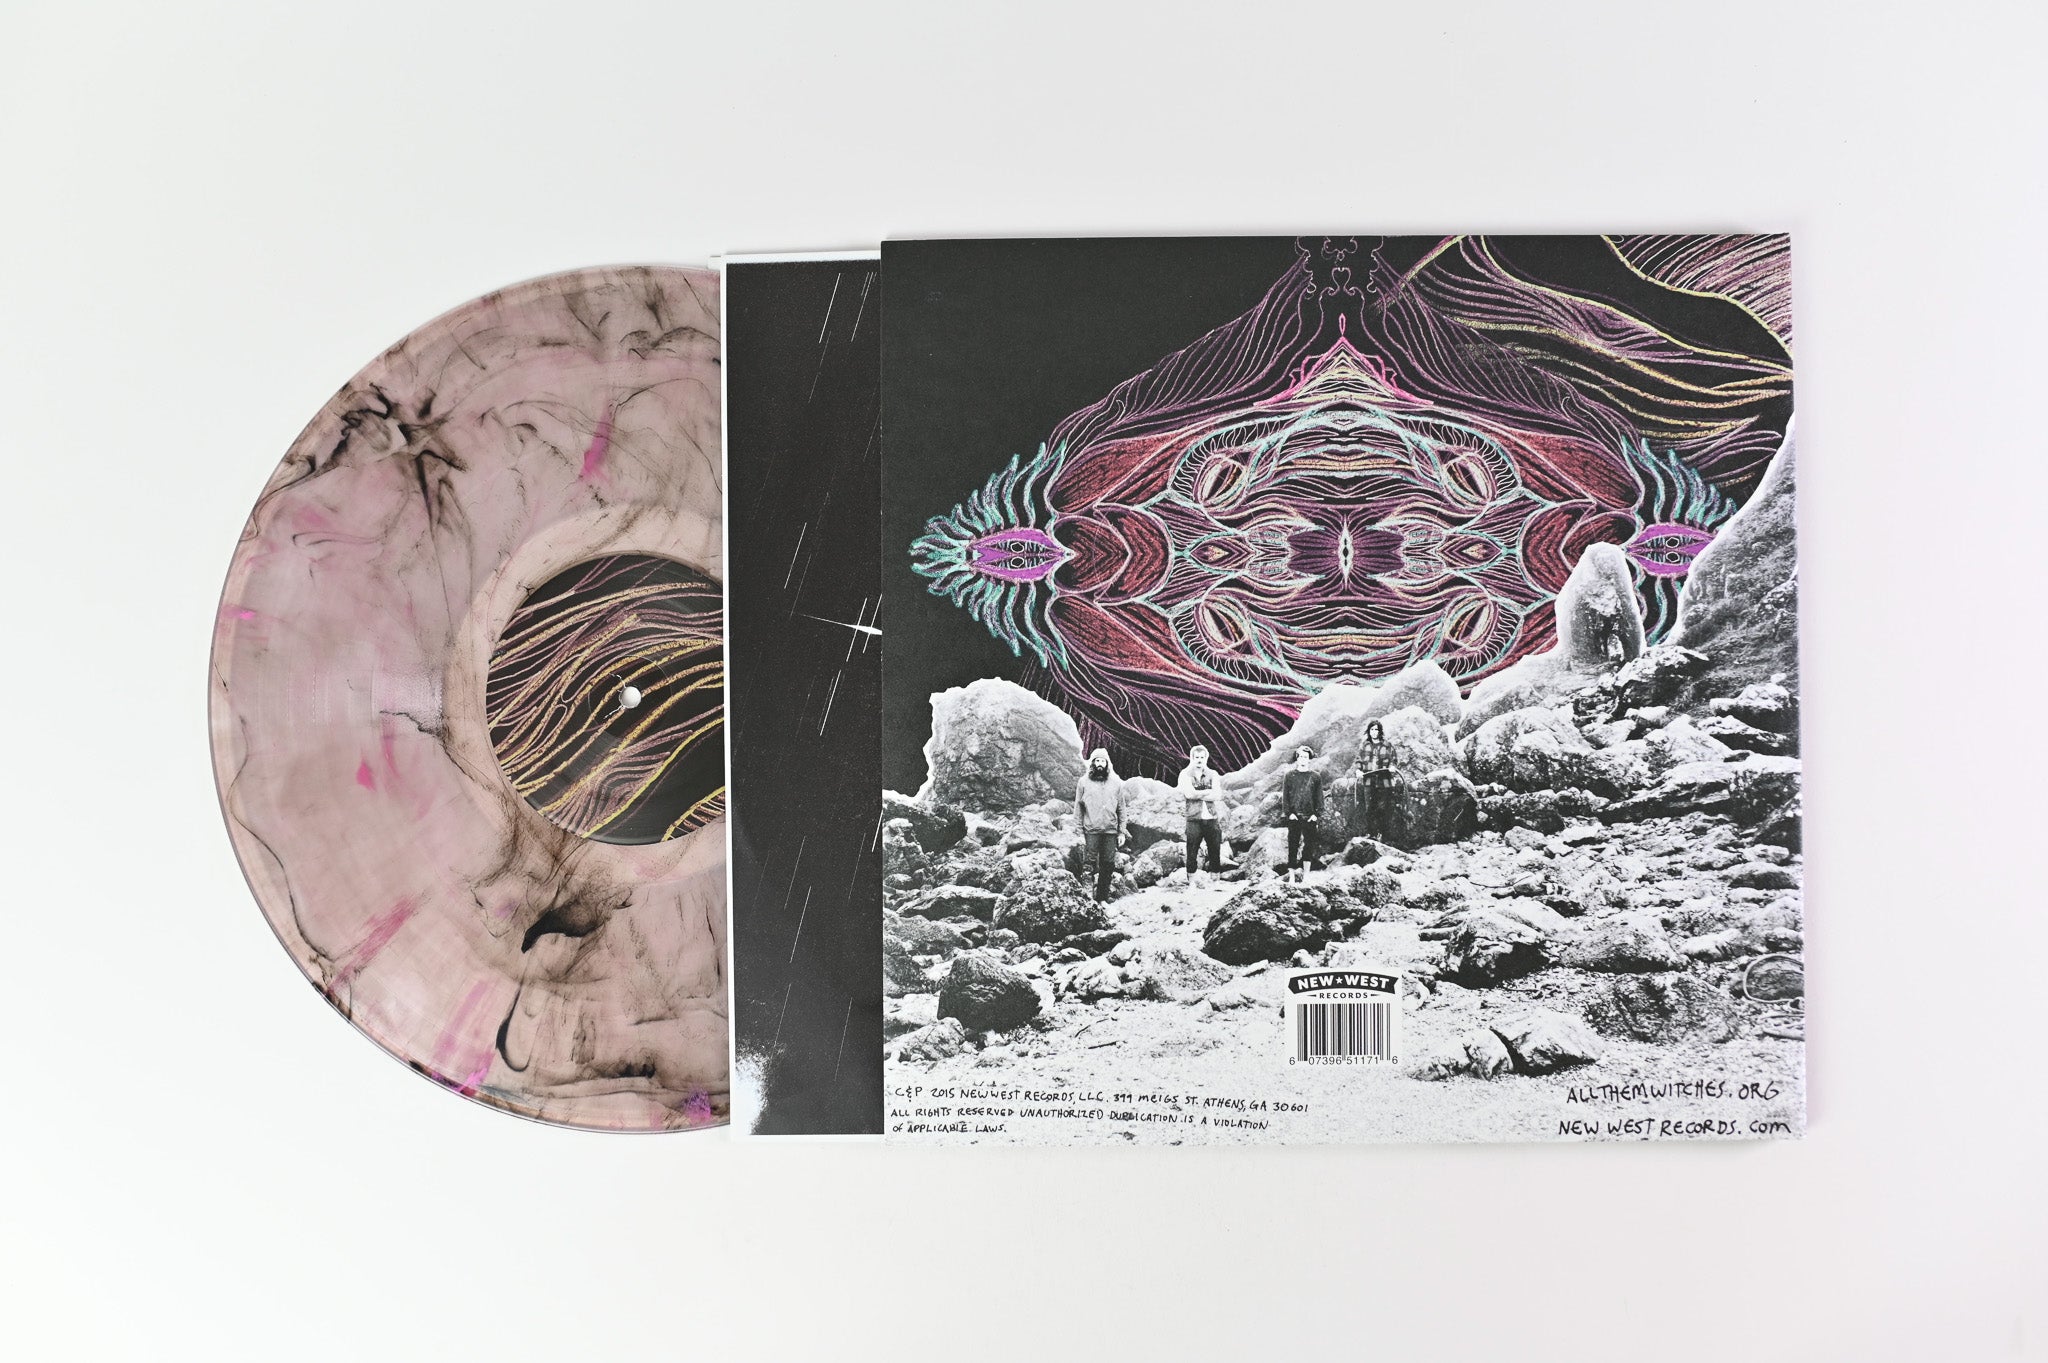 All Them Witches - Dying Surfer Meets His Maker on New West Ltd Pink Smoke